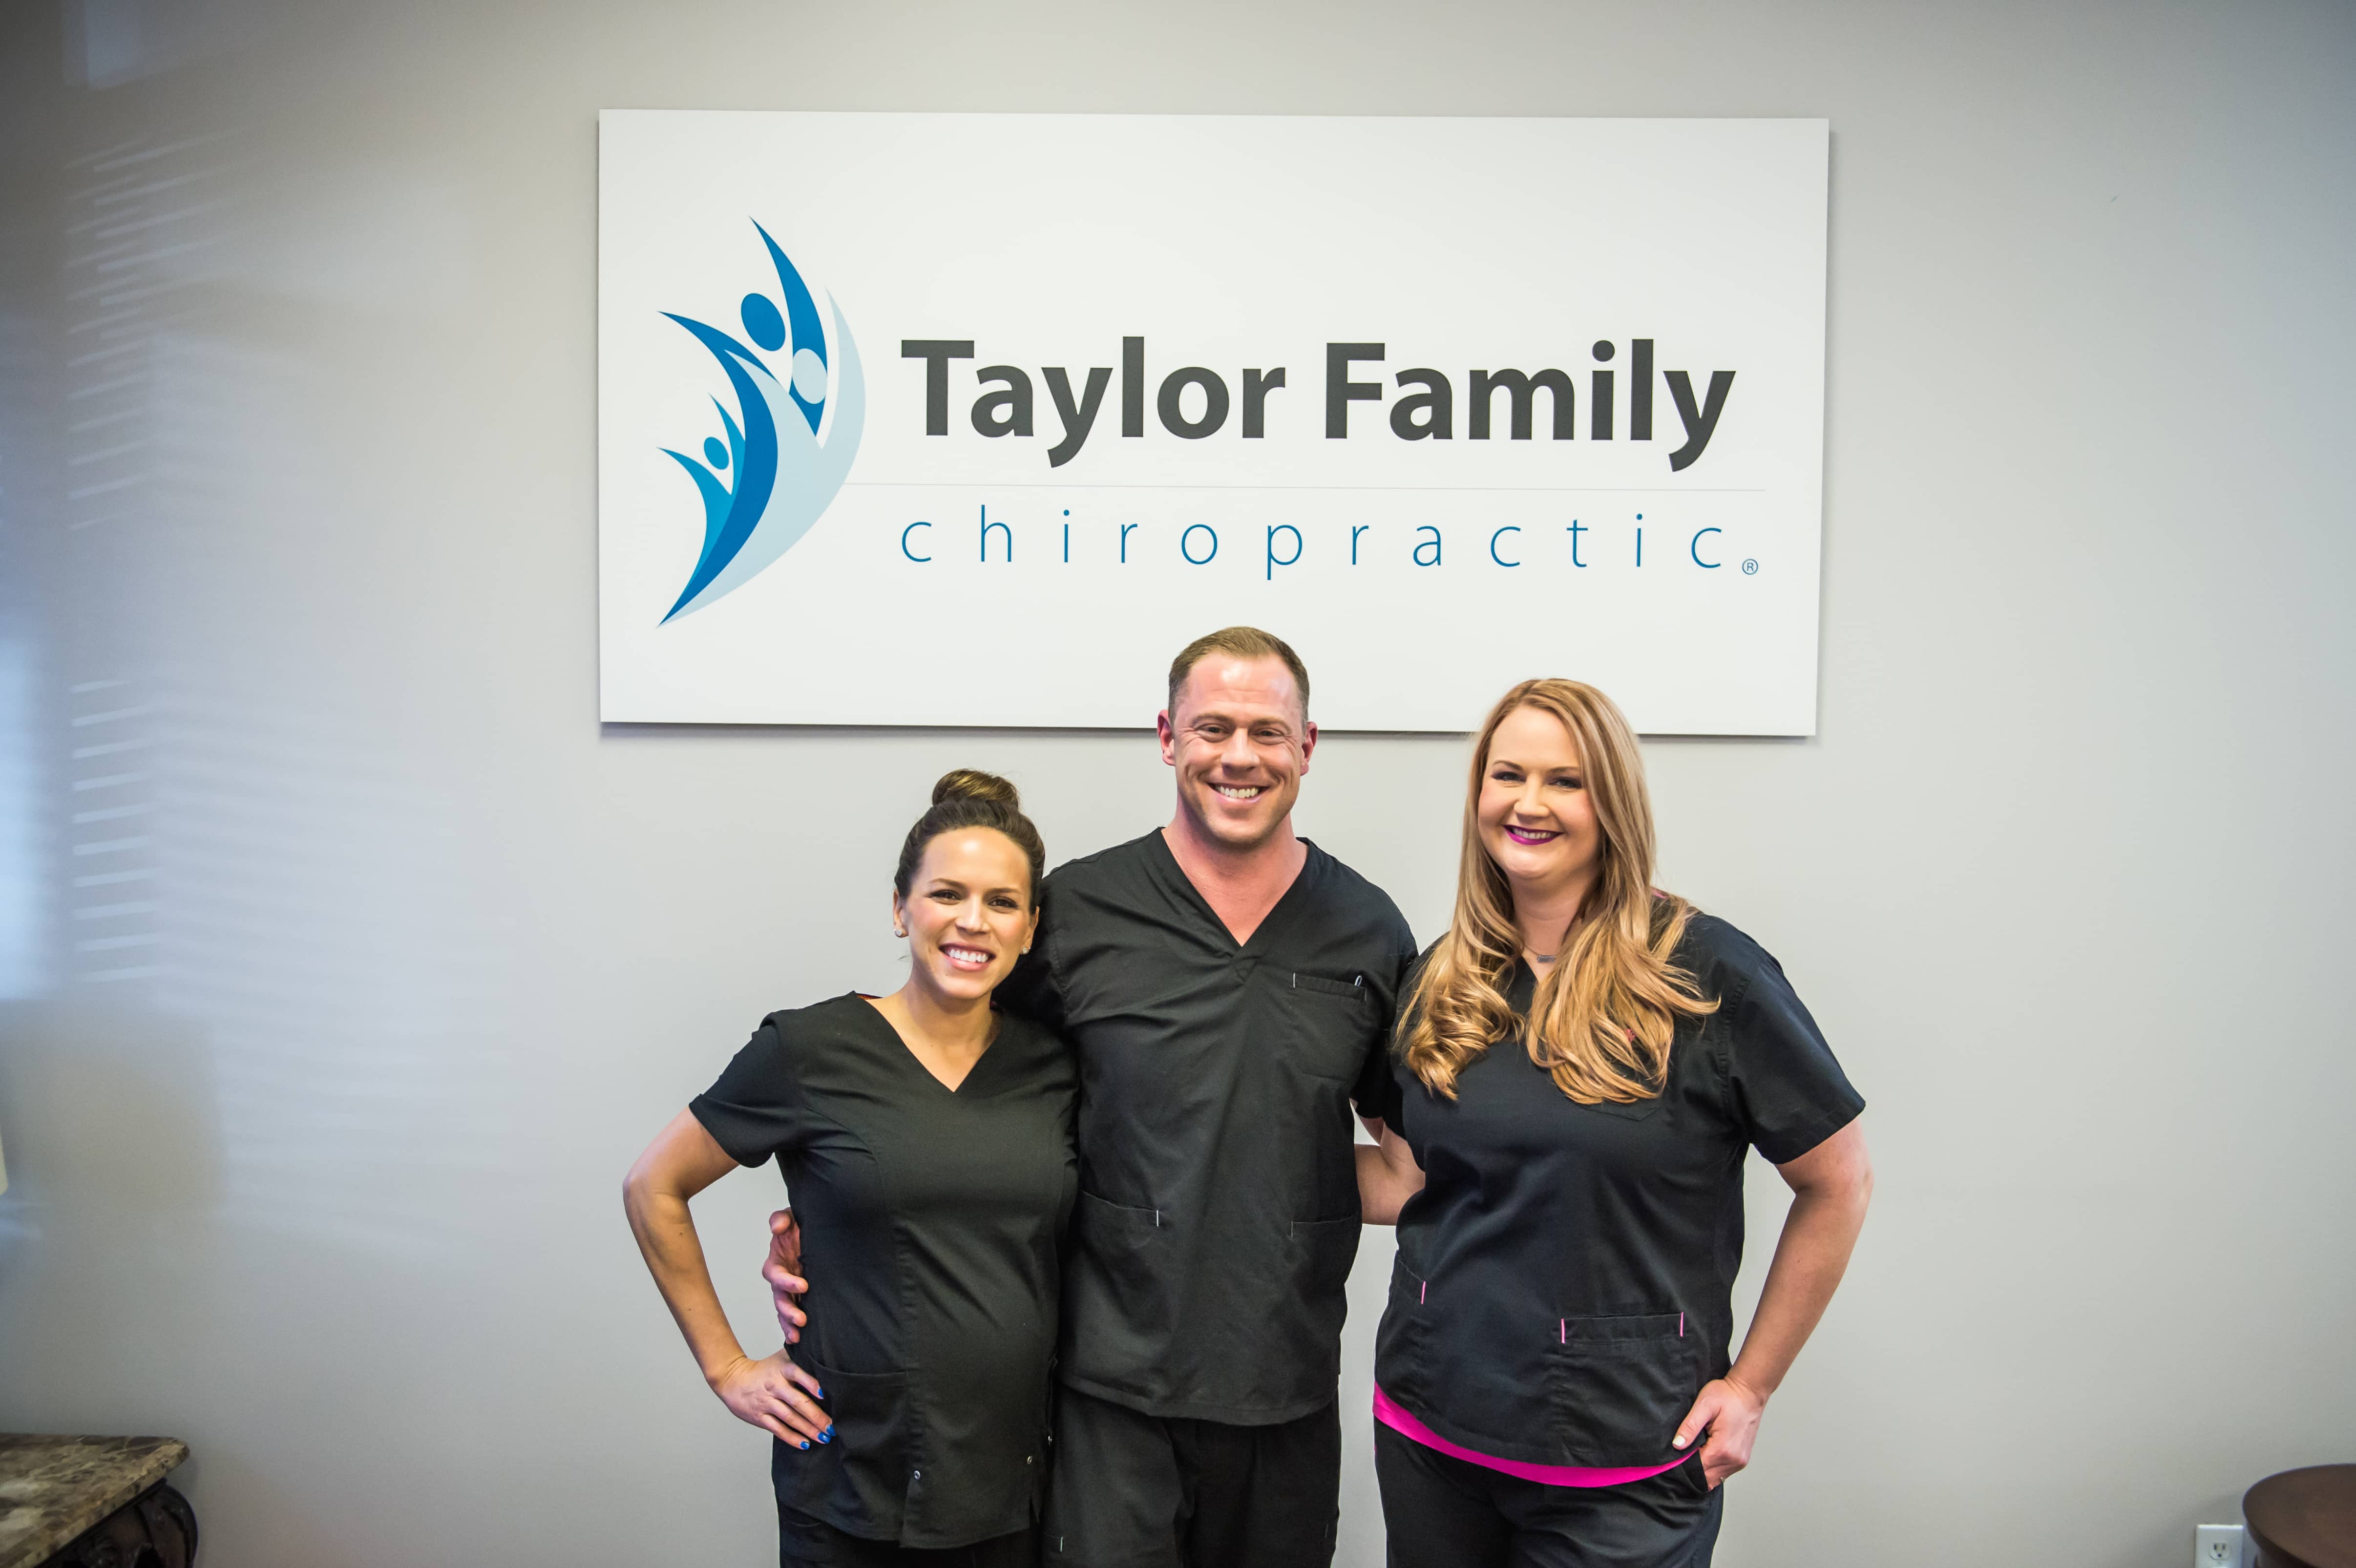 Taylor Family Chiropractic - Frisco, TX, US, chiro practic